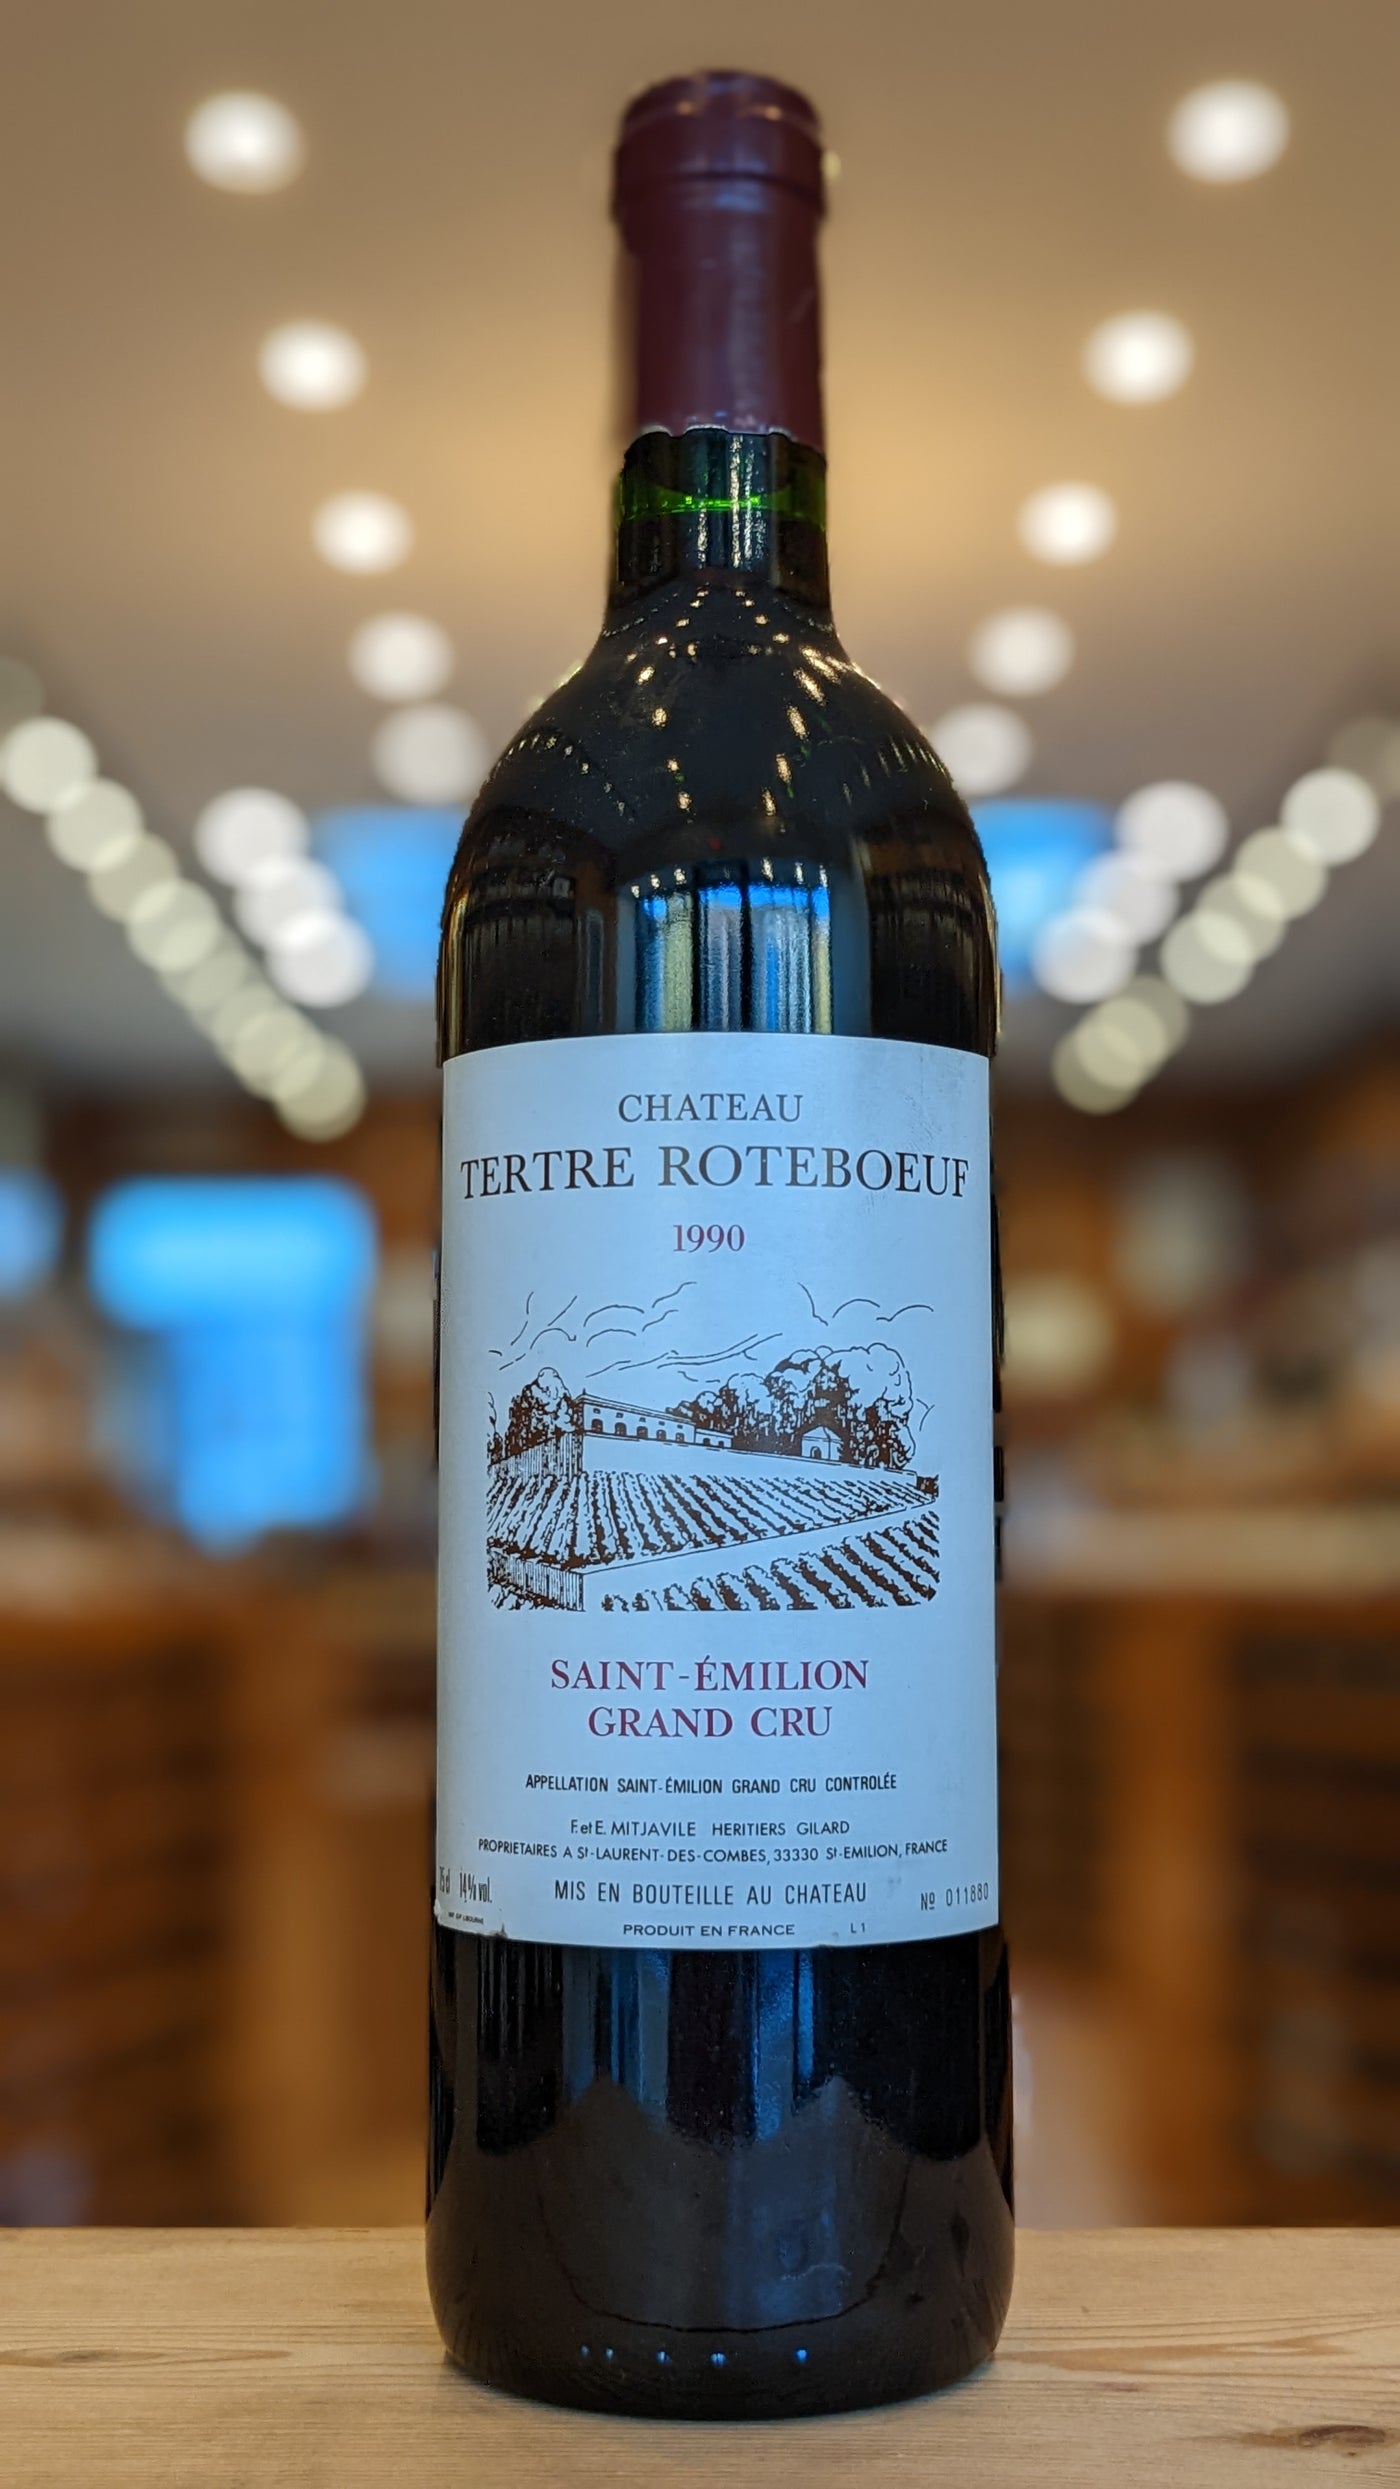 Chateau Tertre Rotebeouf St-Emilion 1990